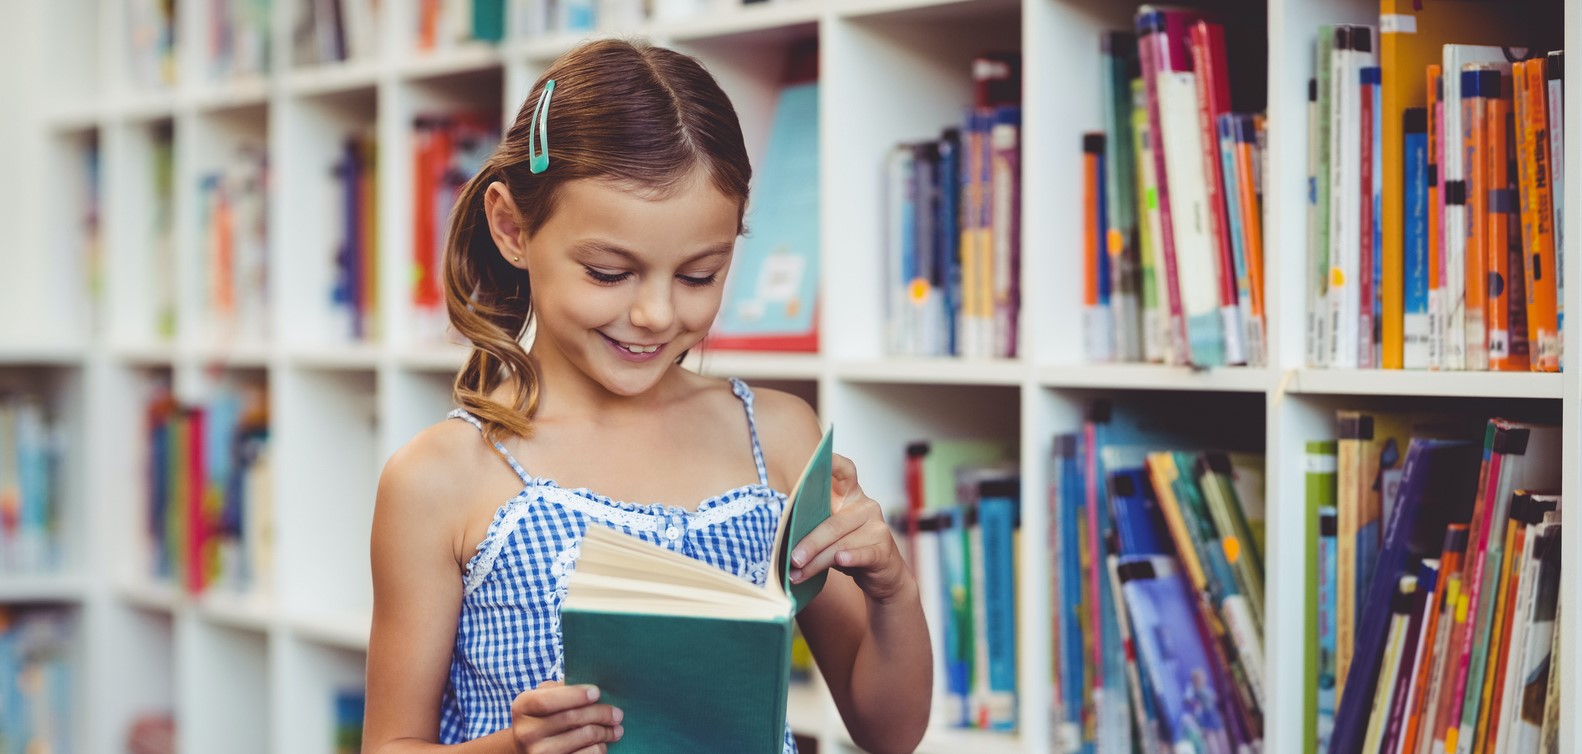 Smiling young girl in blue dress reading a book in a library